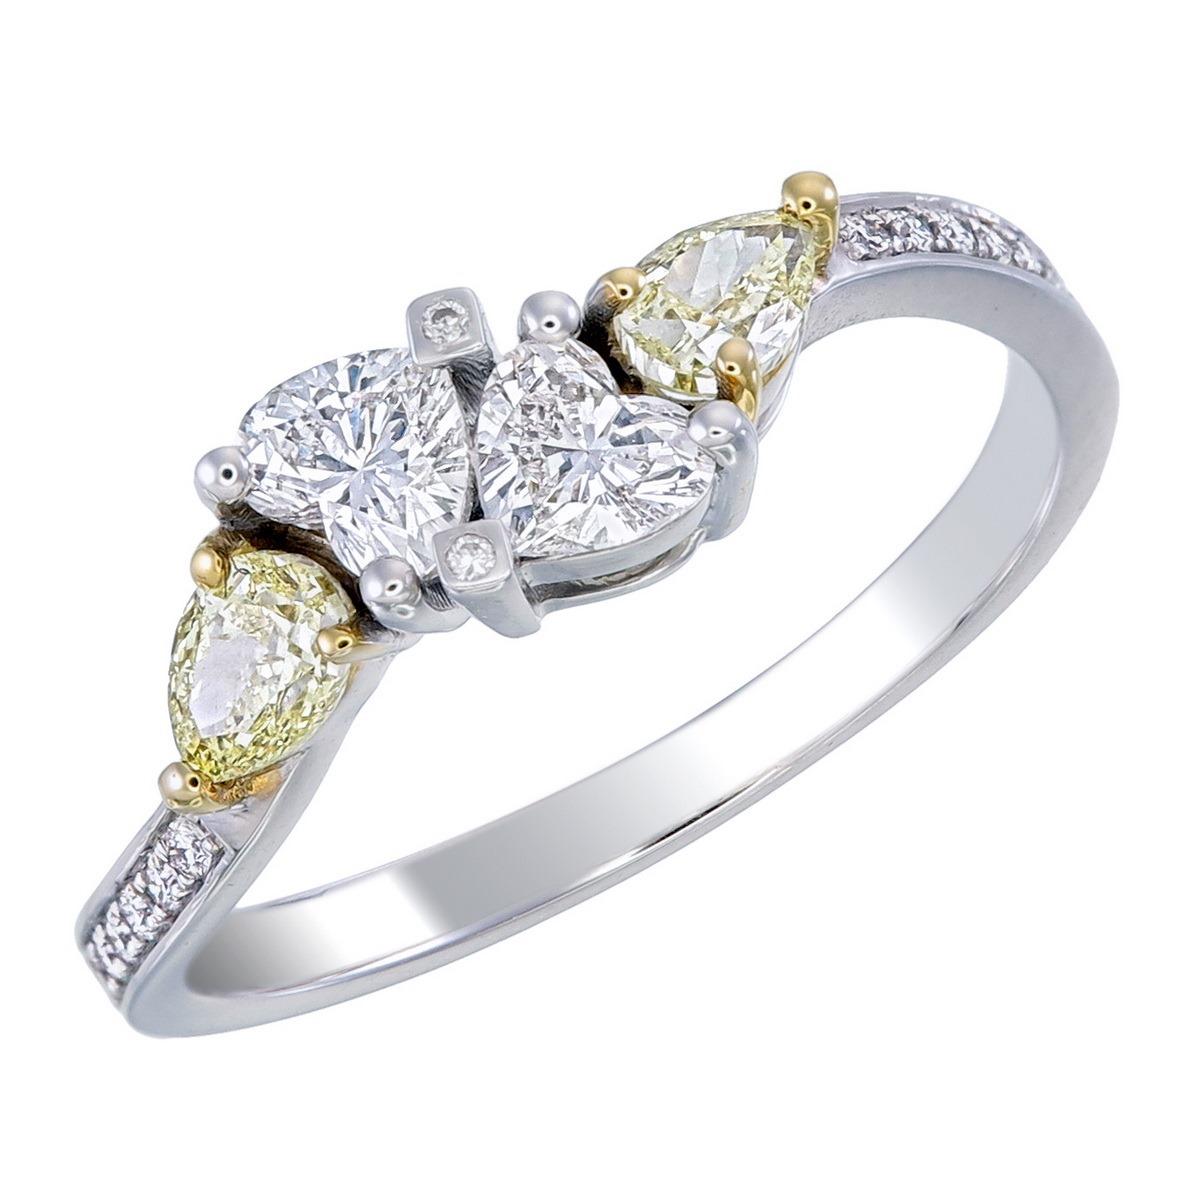 **100% NATURAL FANCY COLOUR DIAMOND JEWELRY**

✪ Jewelry Details ✪

HEART WHITE- 0.39CT

PEAR YELLOW- 0.38CT

ROUND WHITE- 0.10CT

♦ GROSS WEIGHT: 2.28 grams

➛ Metal Type: 18k Gold
➛ Jewelry Type: Fashion ring, Bridal